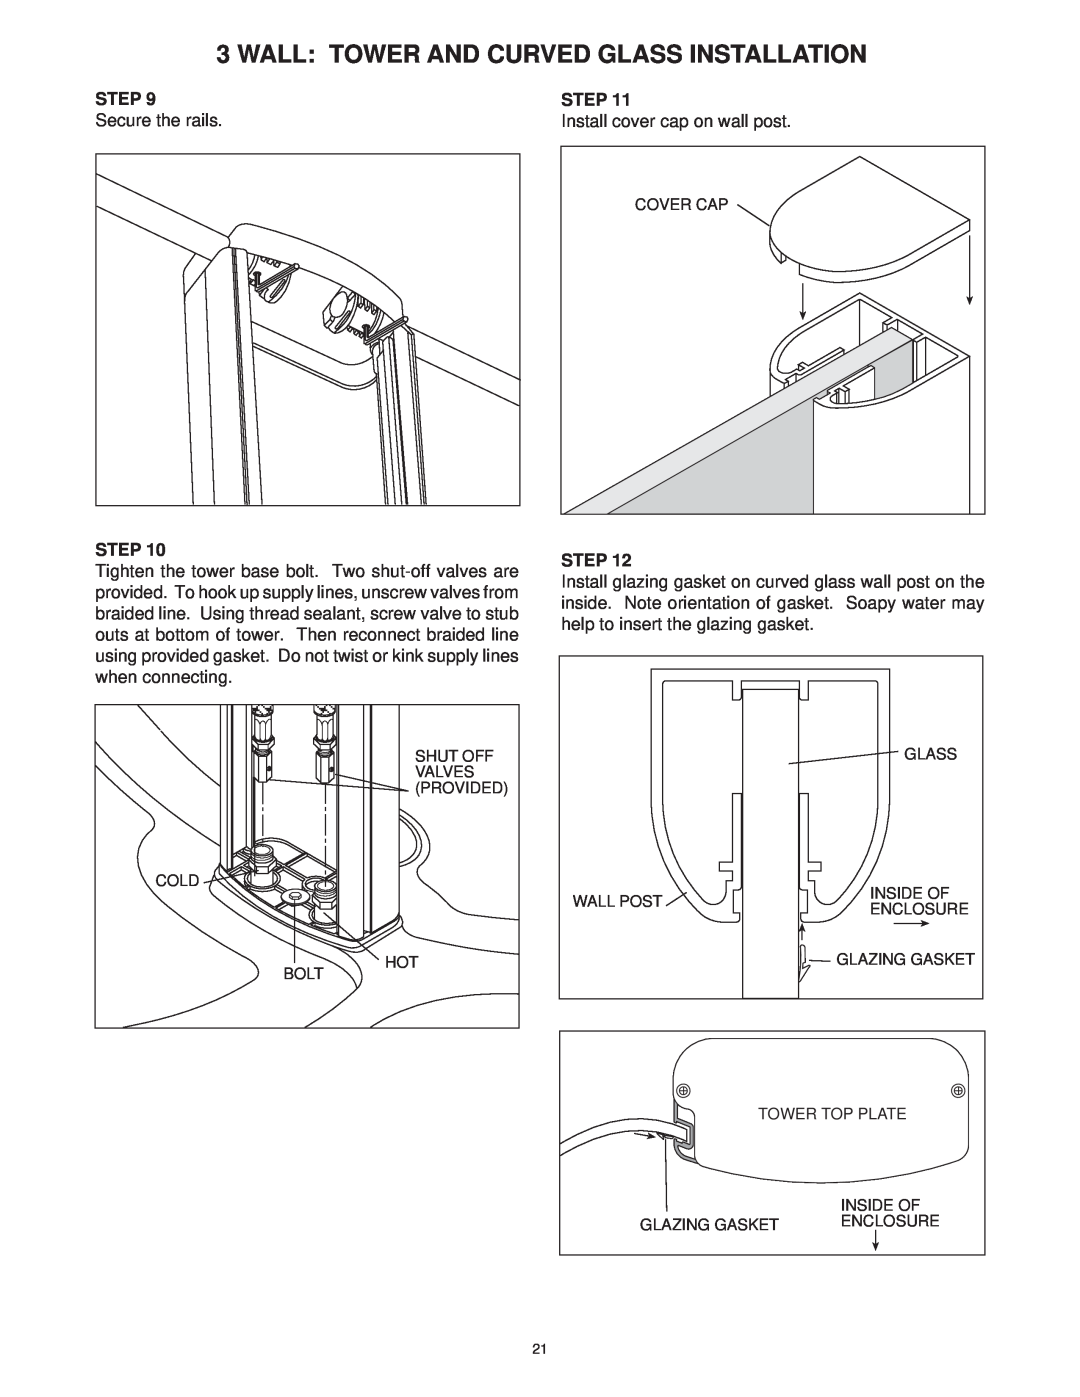 Jacuzzi SUMMER RAINTM 2 WALL & 3 WALL WALK-IN SHOWER SYSTEMS manual Secure the rails, Install cover cap on wall post, Step 